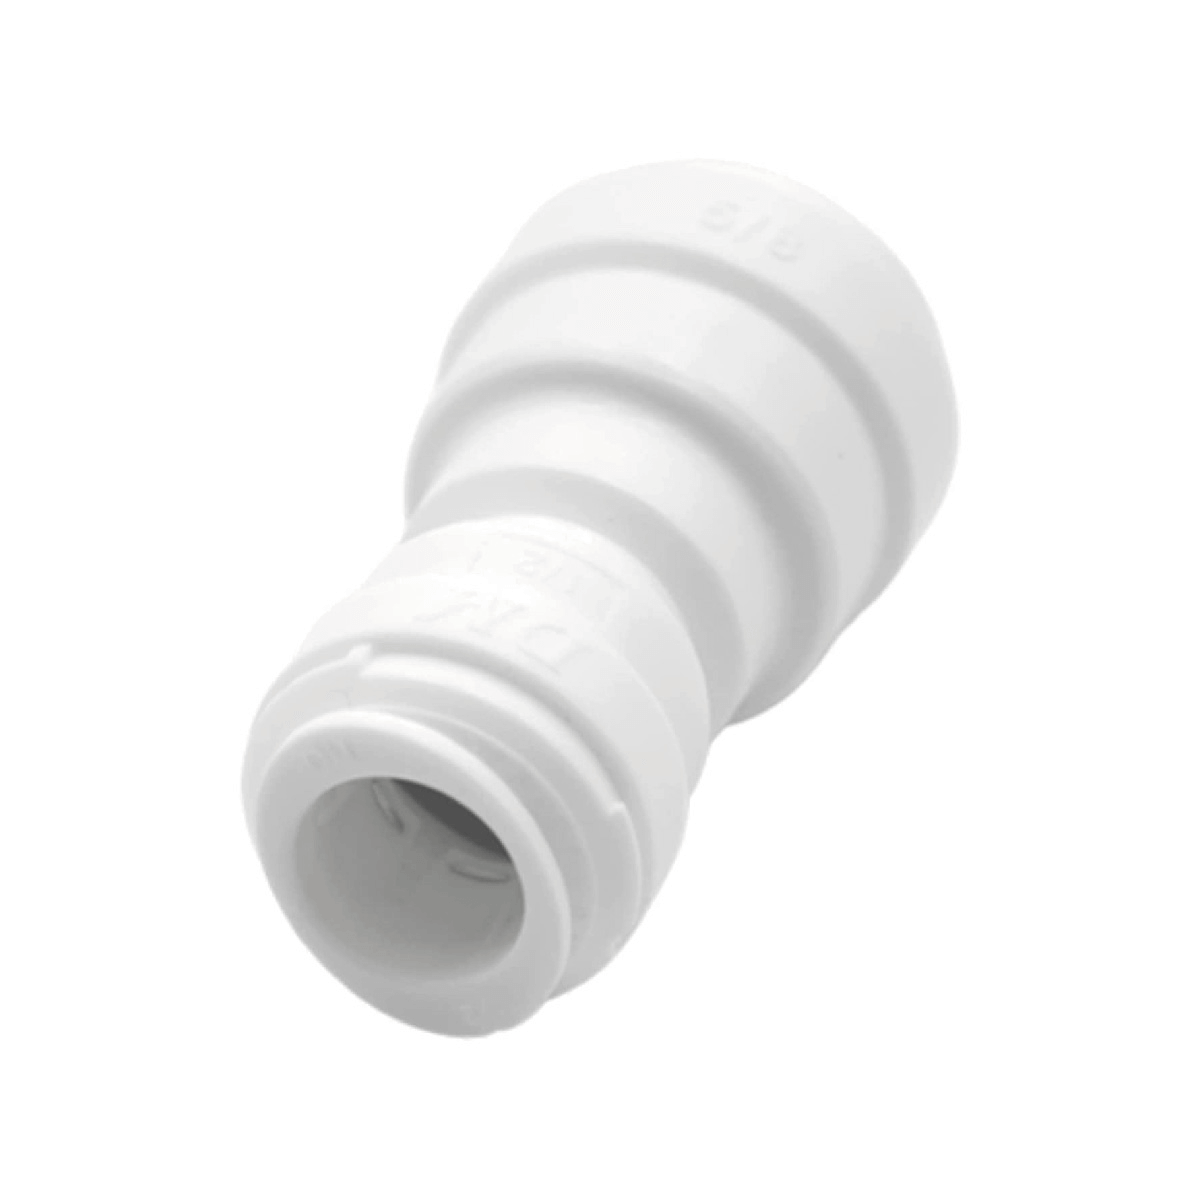 DMFit AUC Acetal Fitting Union Connector Push-to-Connect 1/4" , 3/8",1/2" Tube OD (10 Pack)